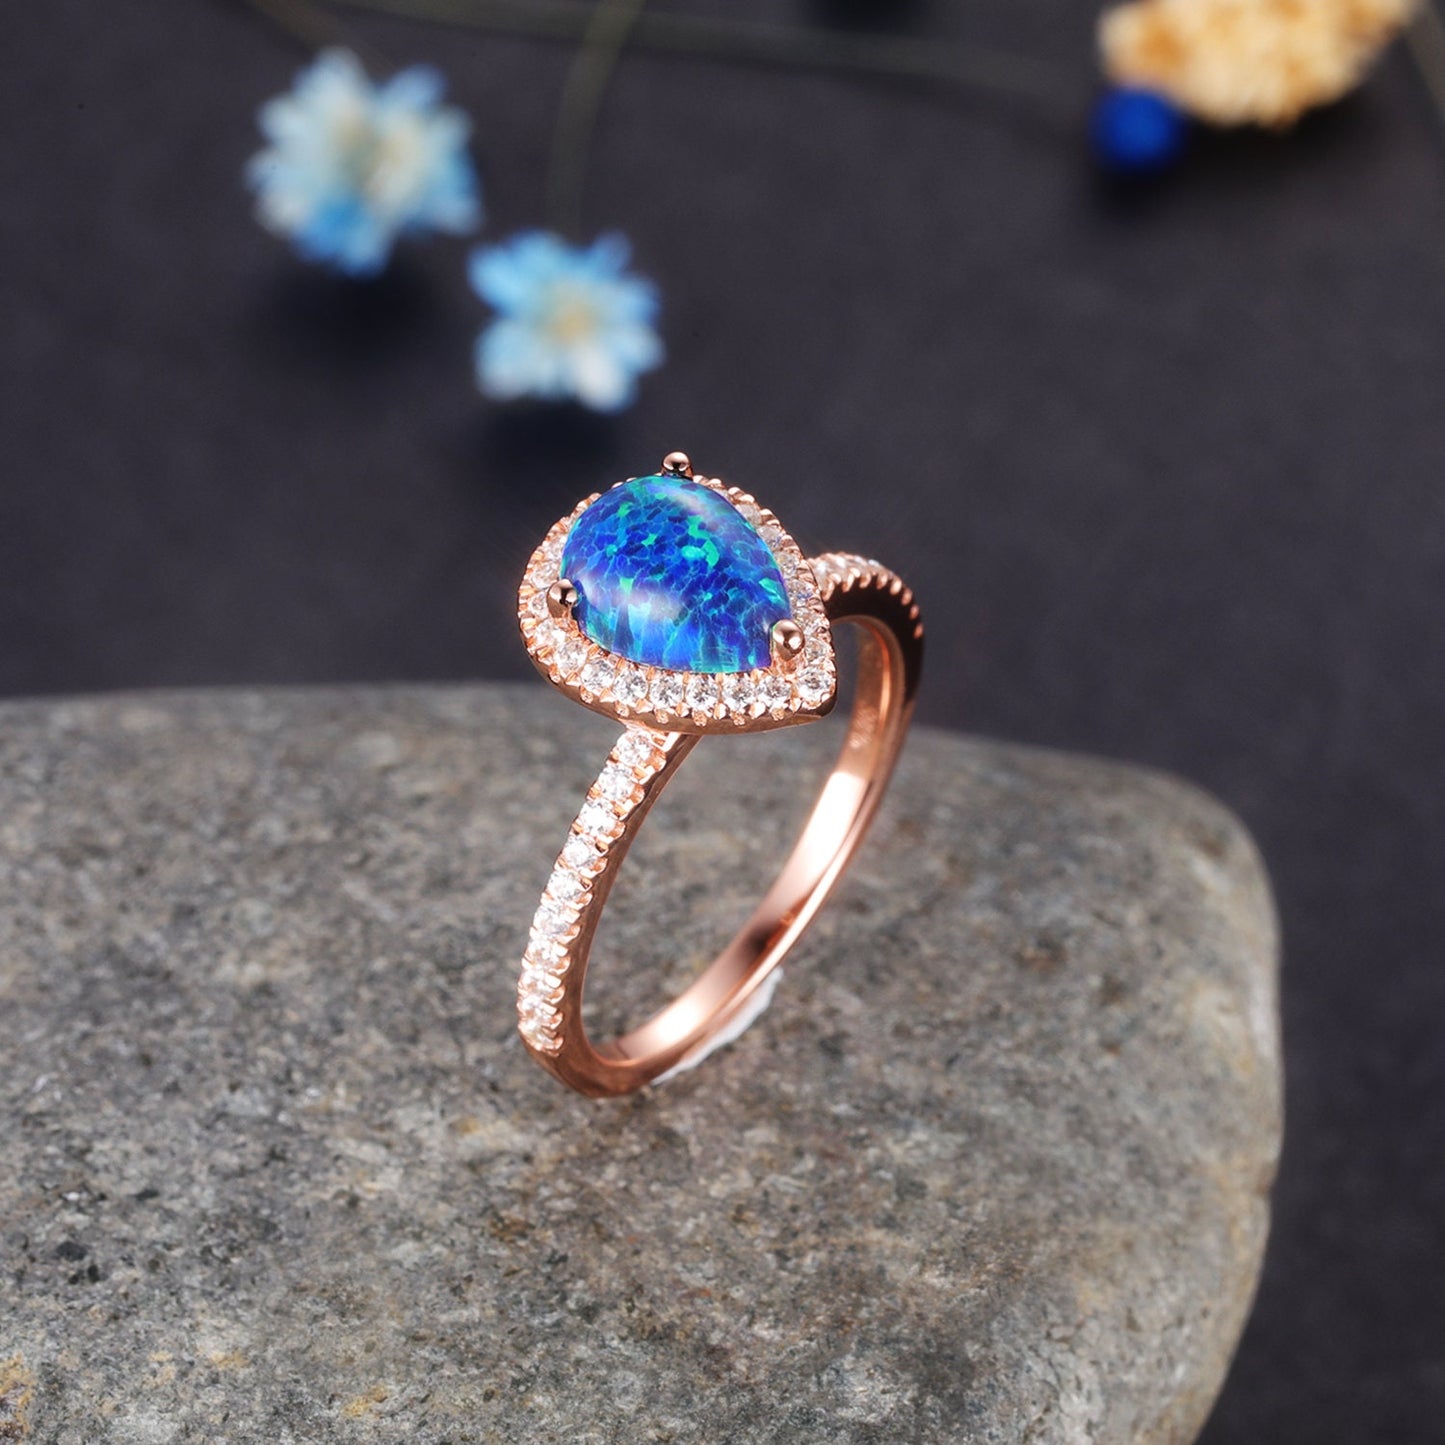 Pear Shaped Black Opal Engagement Ring Diamond Wedding Ring Promise Jewelry For Her 14k Rose Gold October Birthstone Christmas Gift